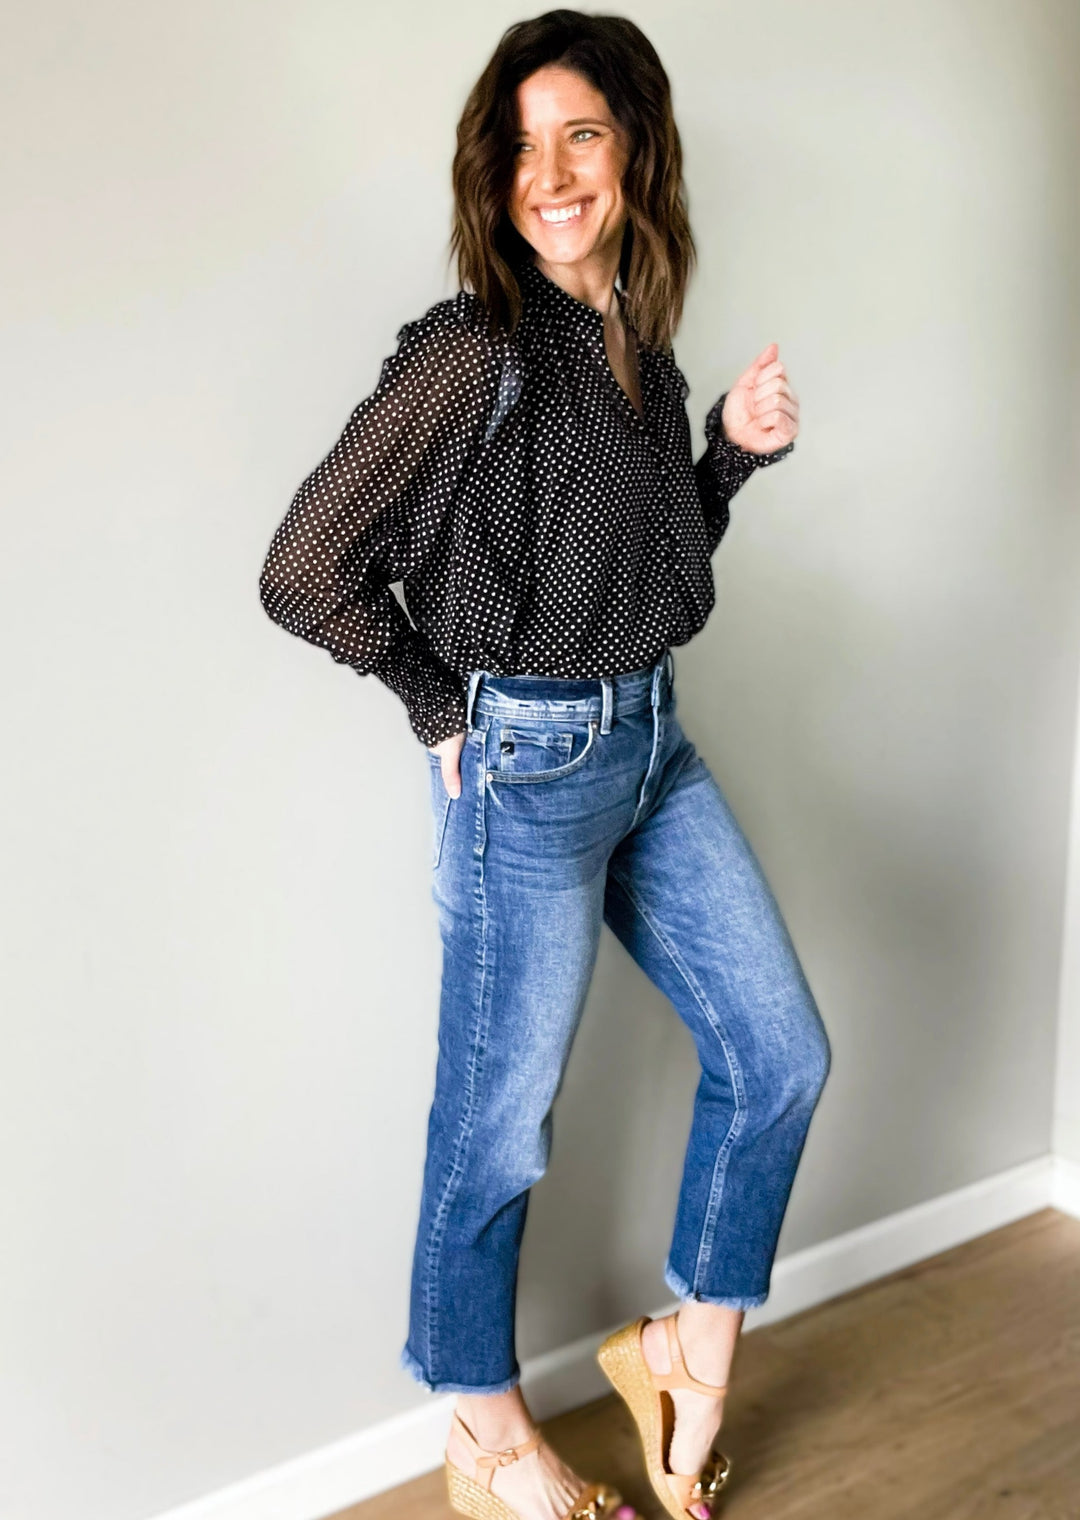 High Rise Slim Straight Medium Wash Jeans | KanCan Women's Jeans sold at Embolden Boutique based out of Central Illinois